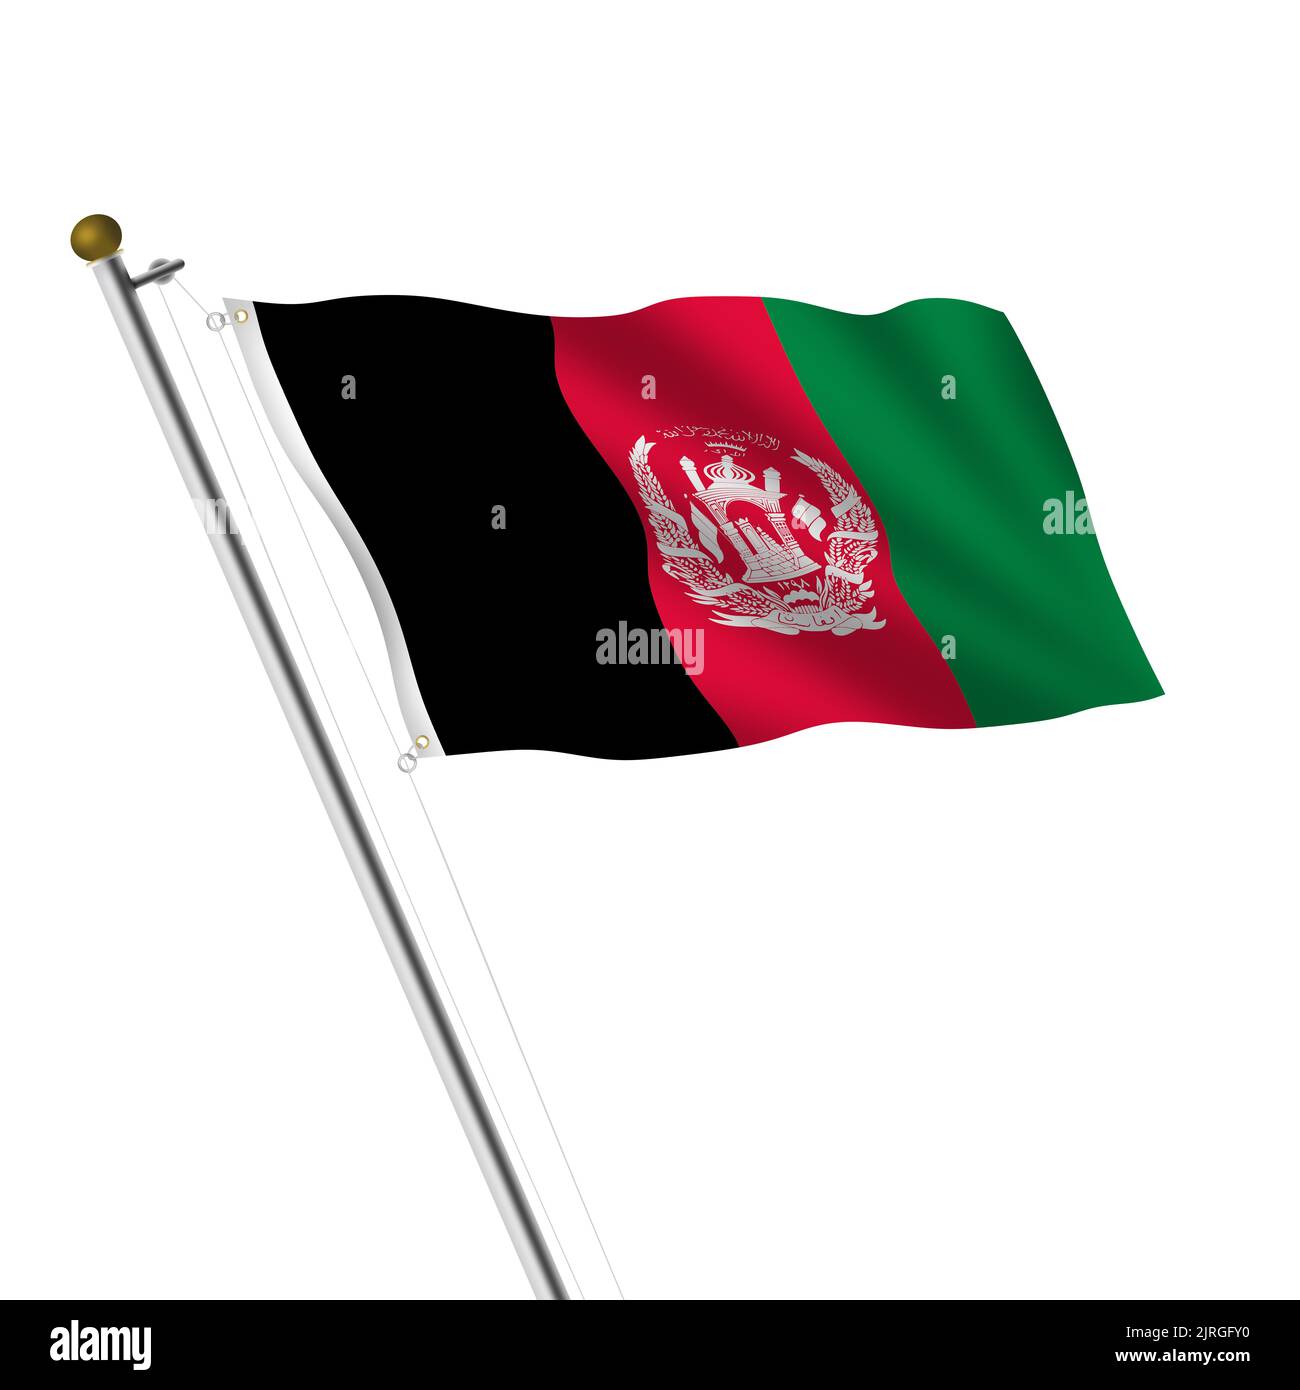 Afghanistan flagpole 3d illustration on white with clipping path Stock Photo